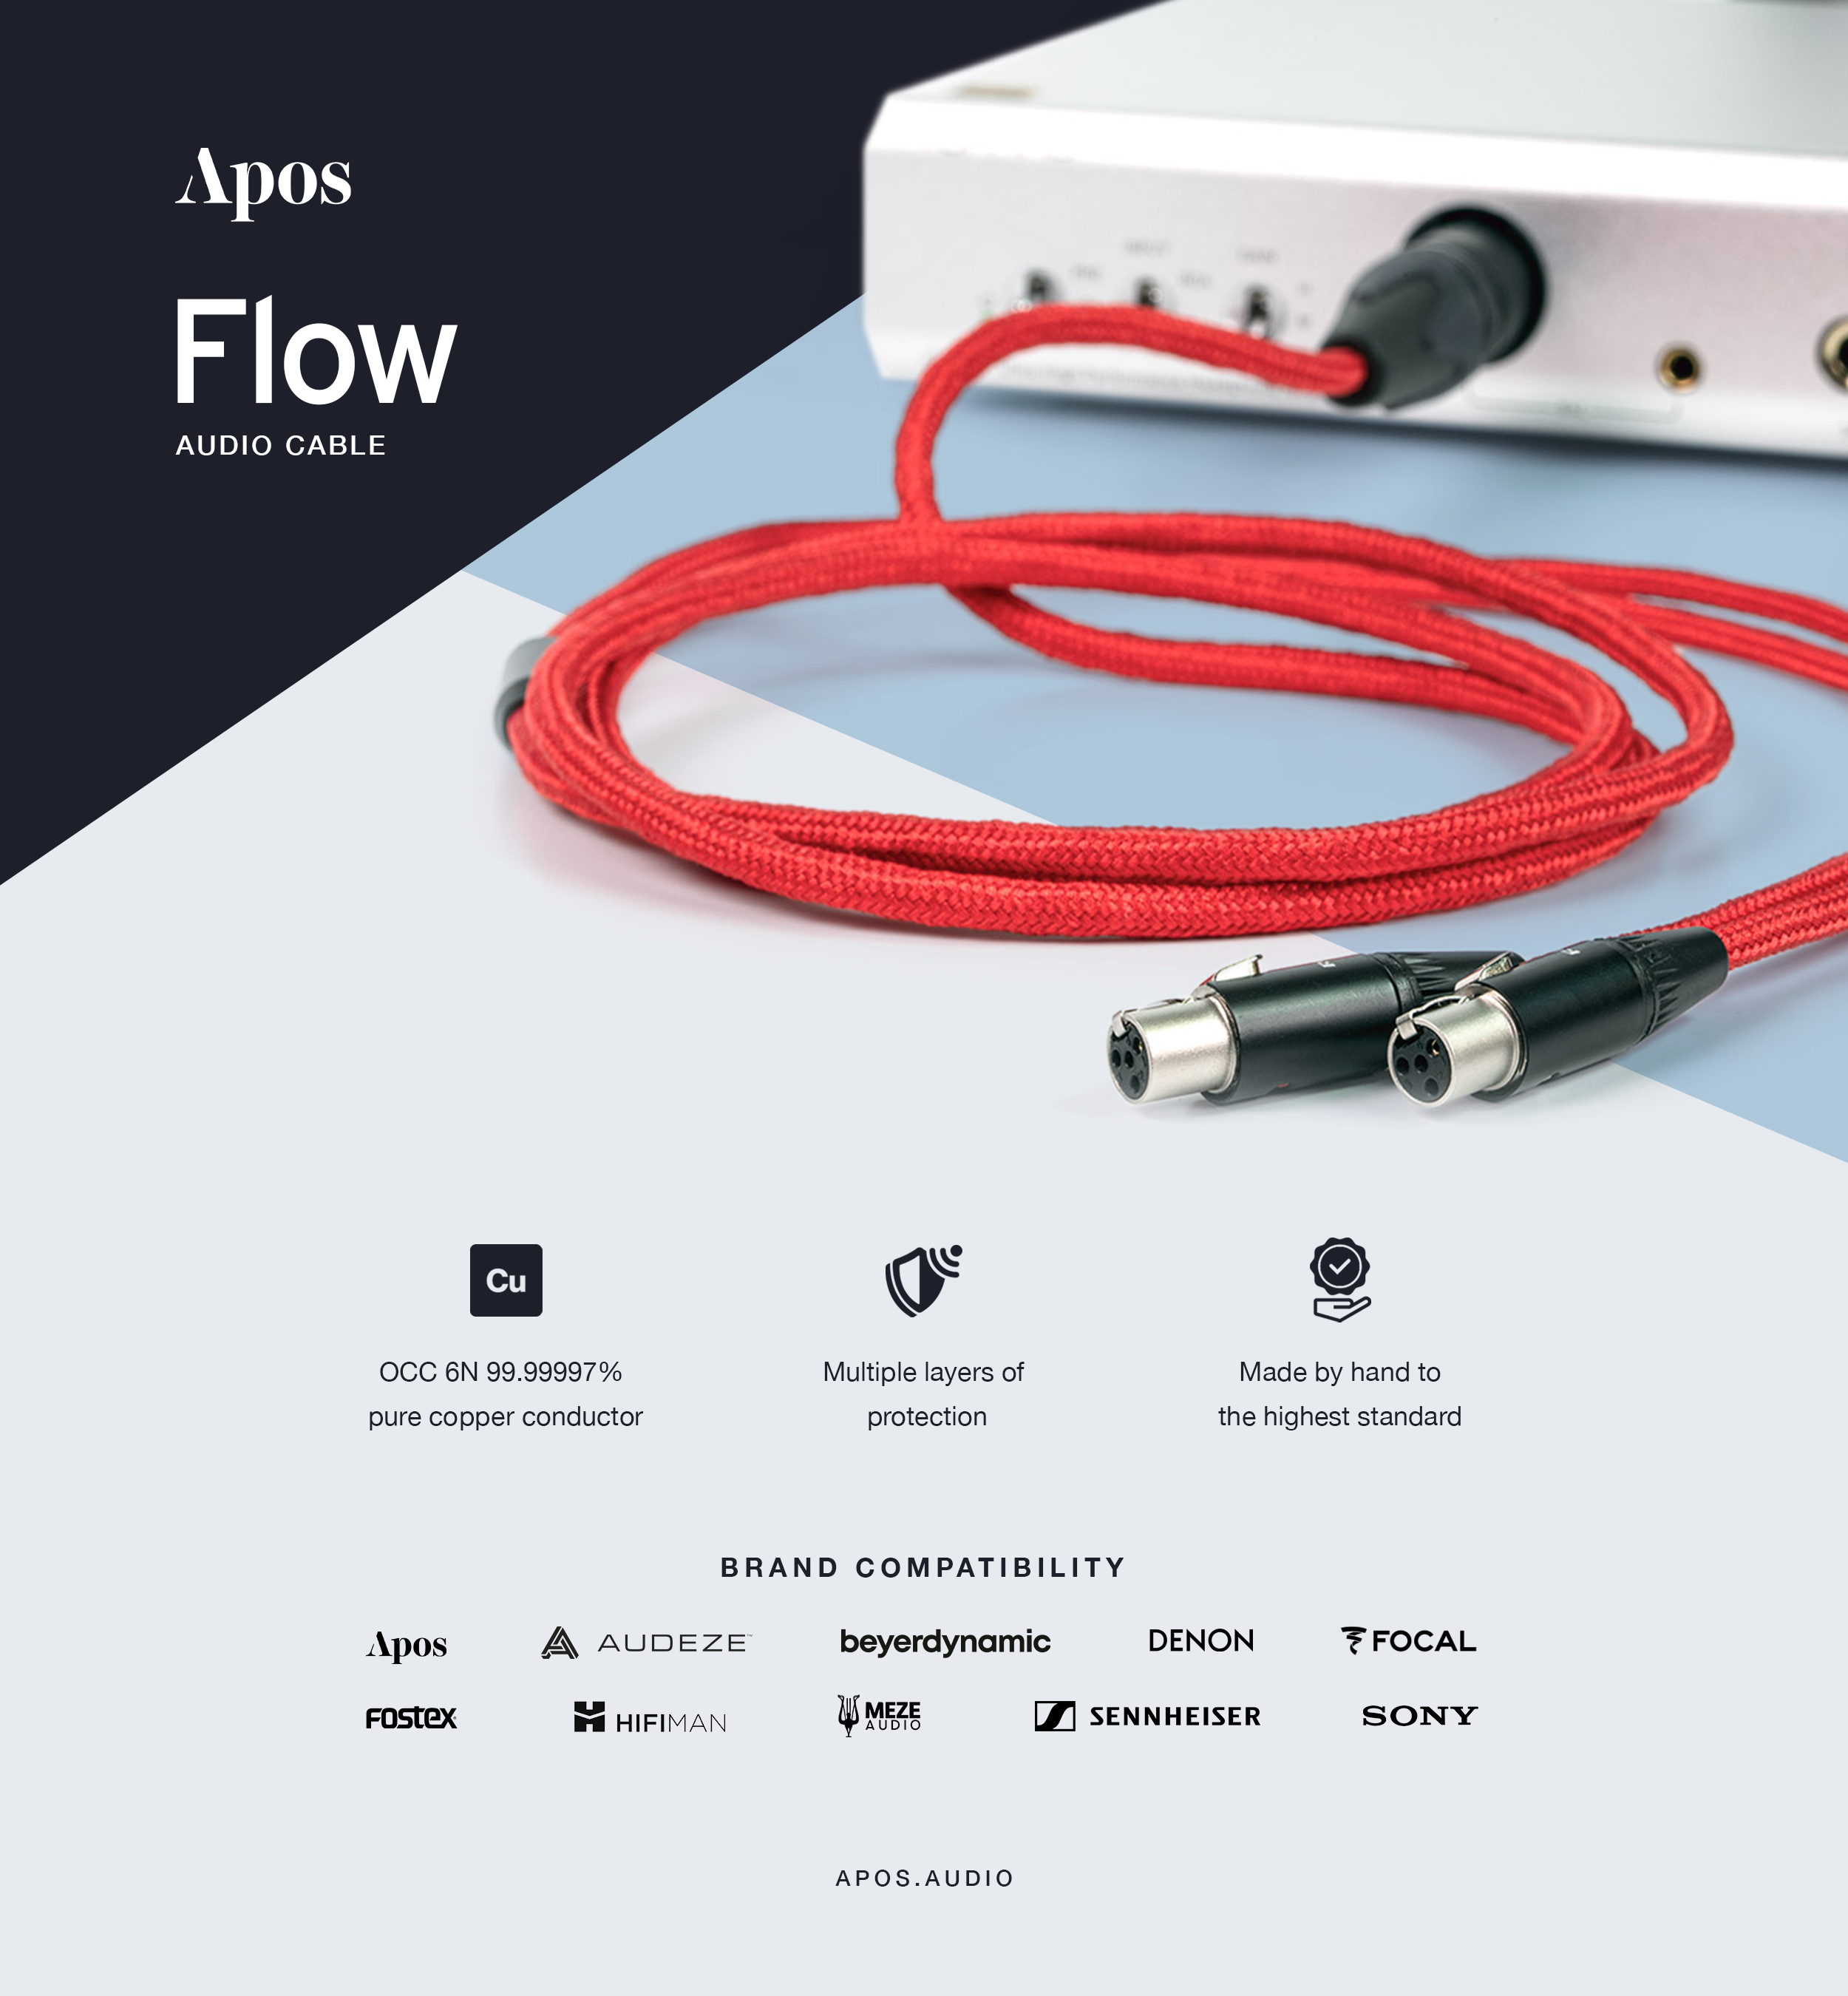 Apos Flow Headphone Cable for [Sony] Z1R / MDR-Z7M2